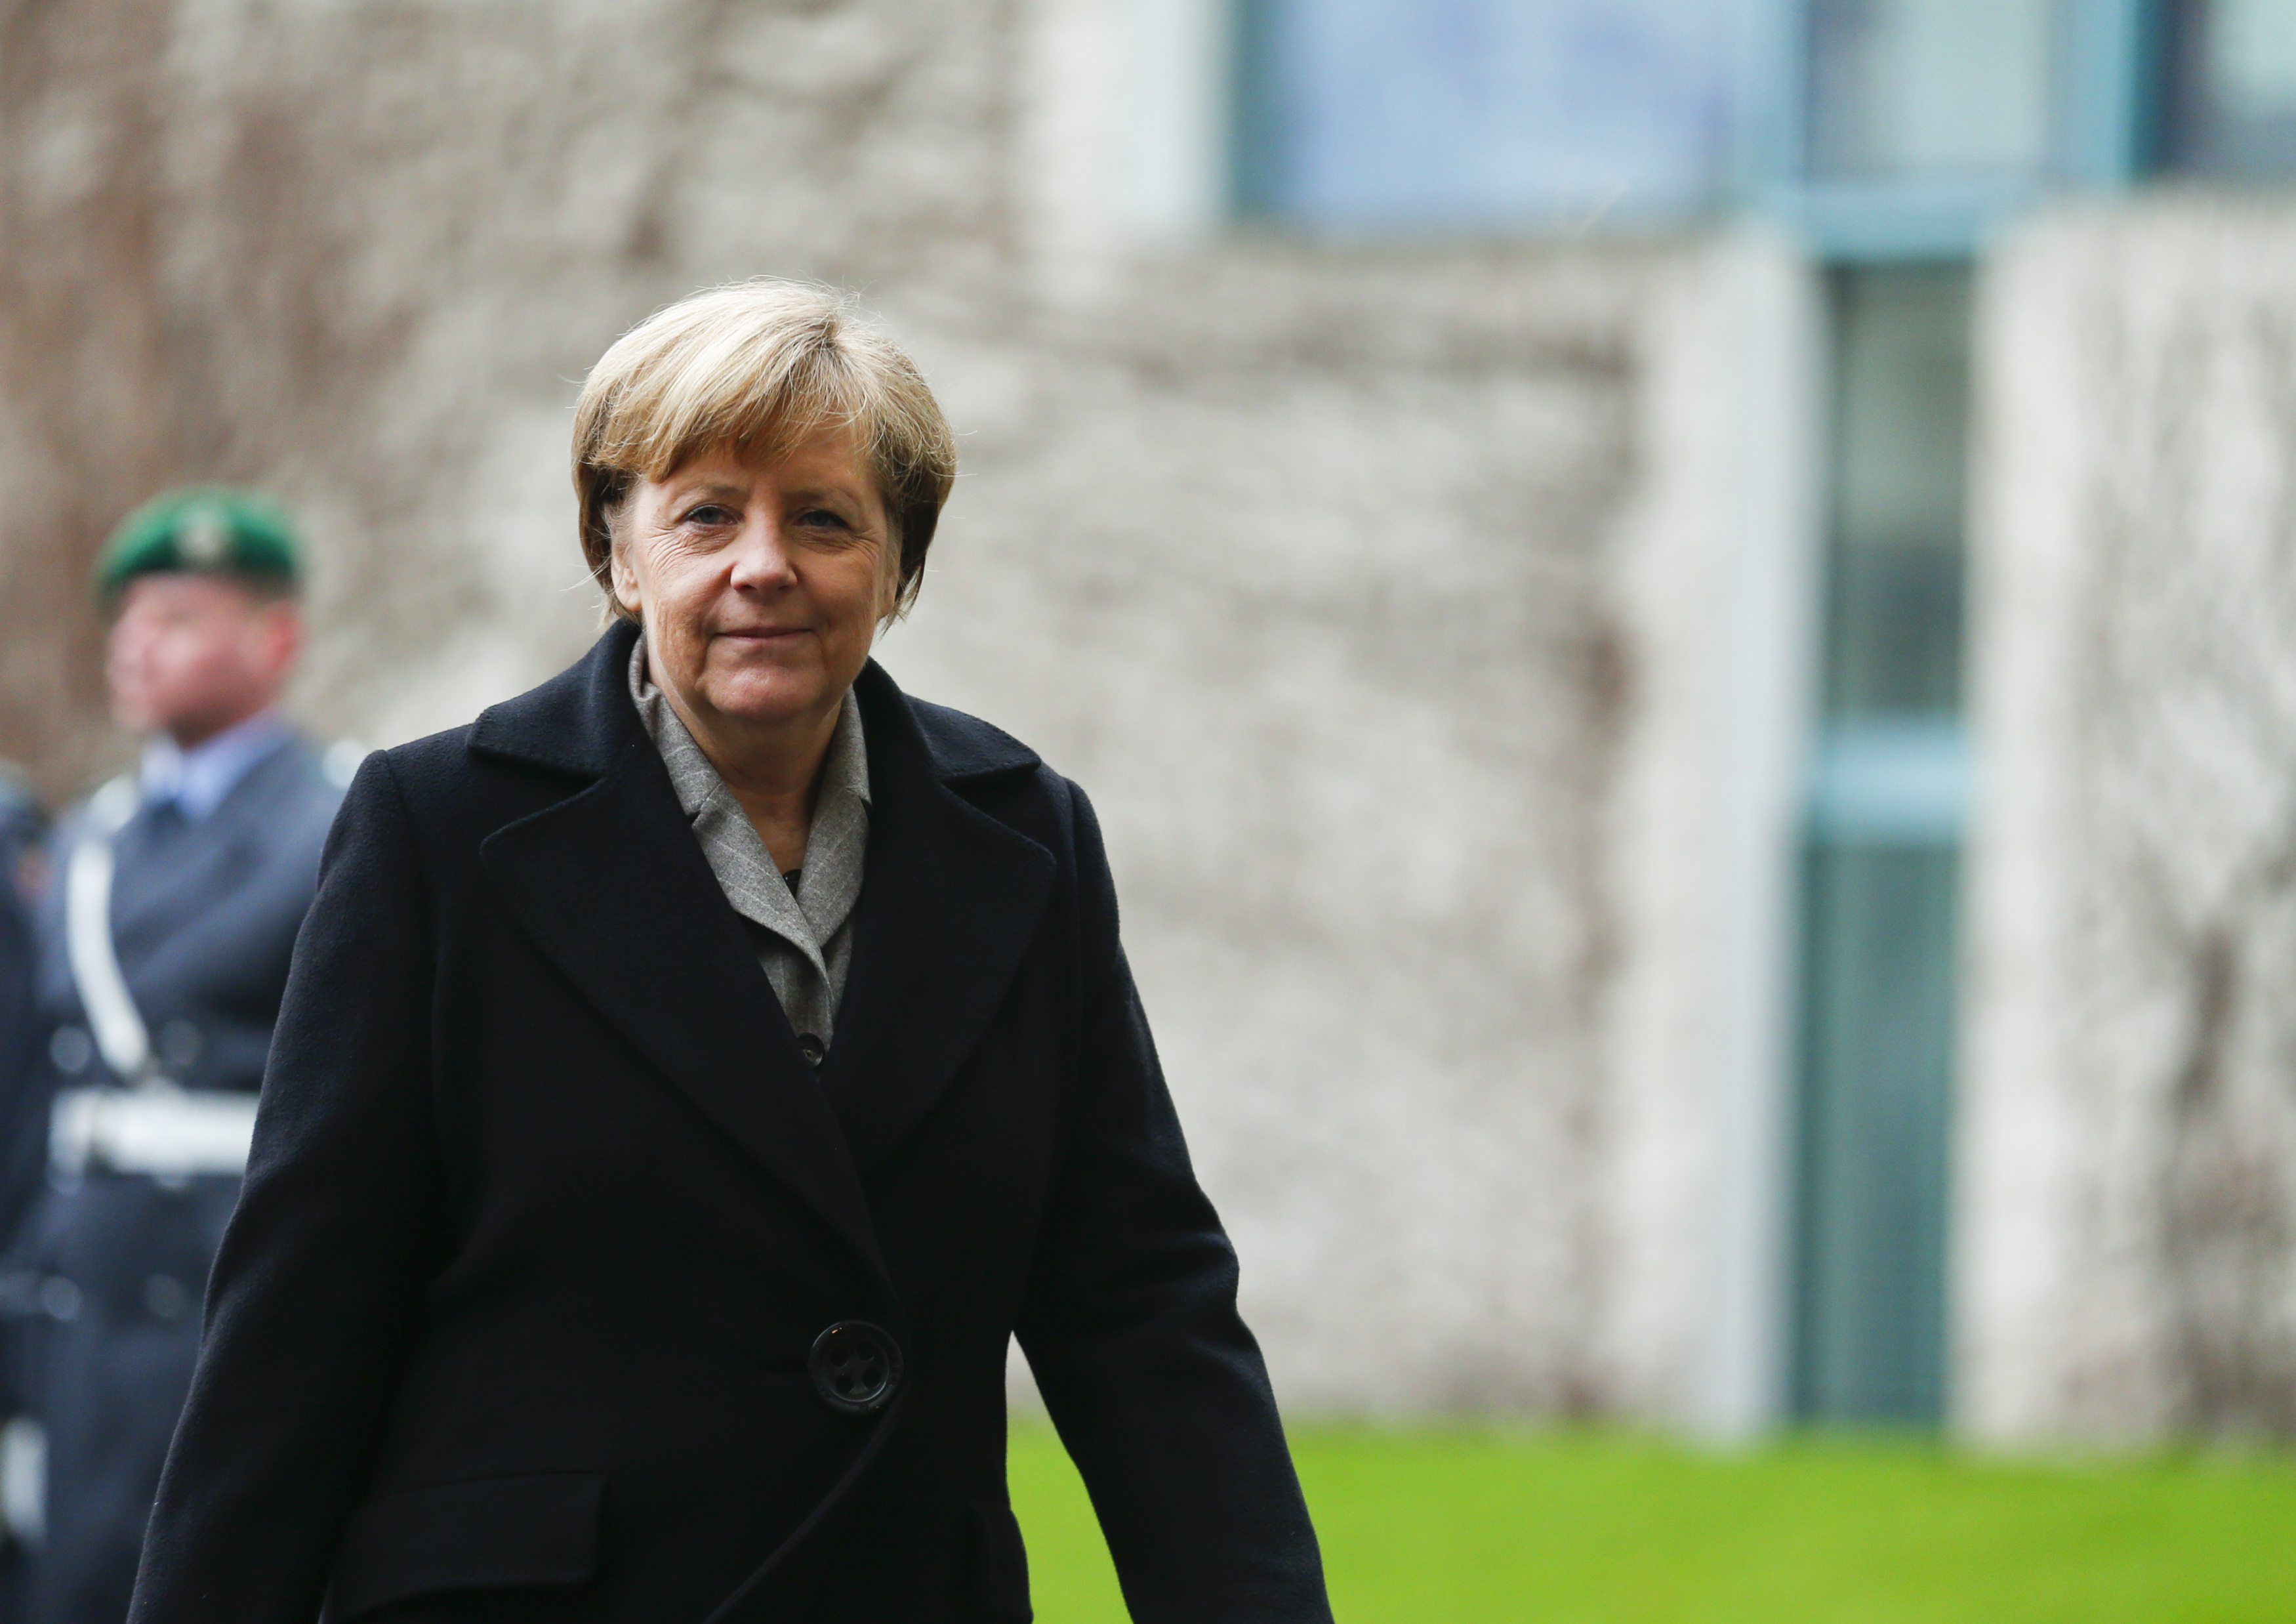 German Chancellor Merkel arrives to attend a welcoming ceremony for Turkish Prime Minister Davutoglu in Berlin